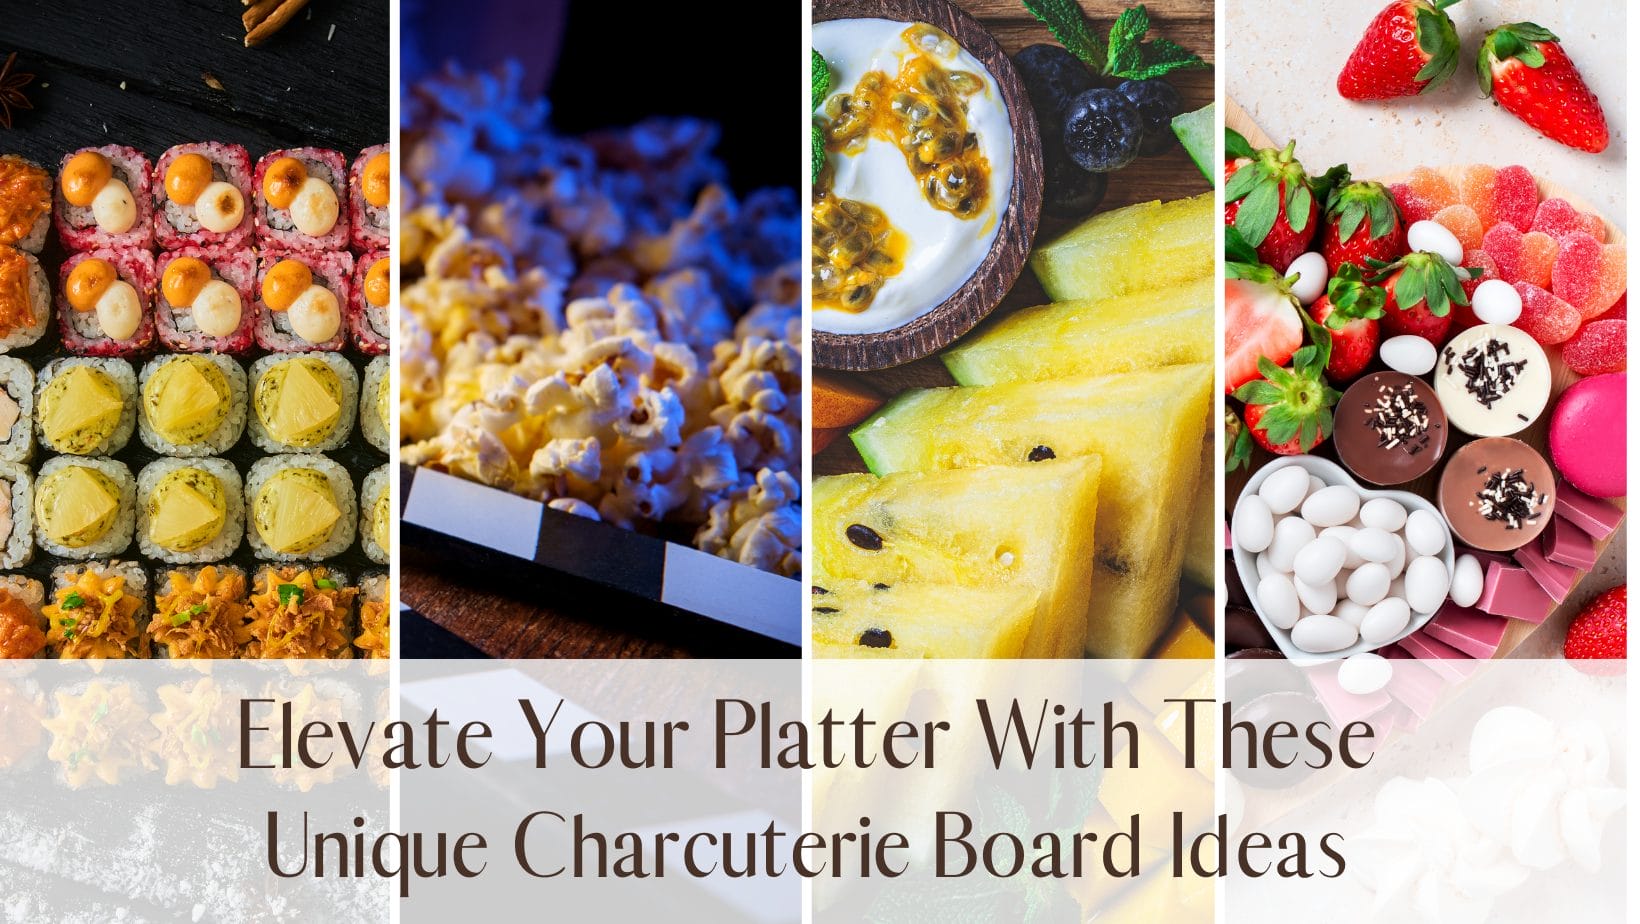 Elevate Your Platter With These Unique Charcuterie Board Ideas 